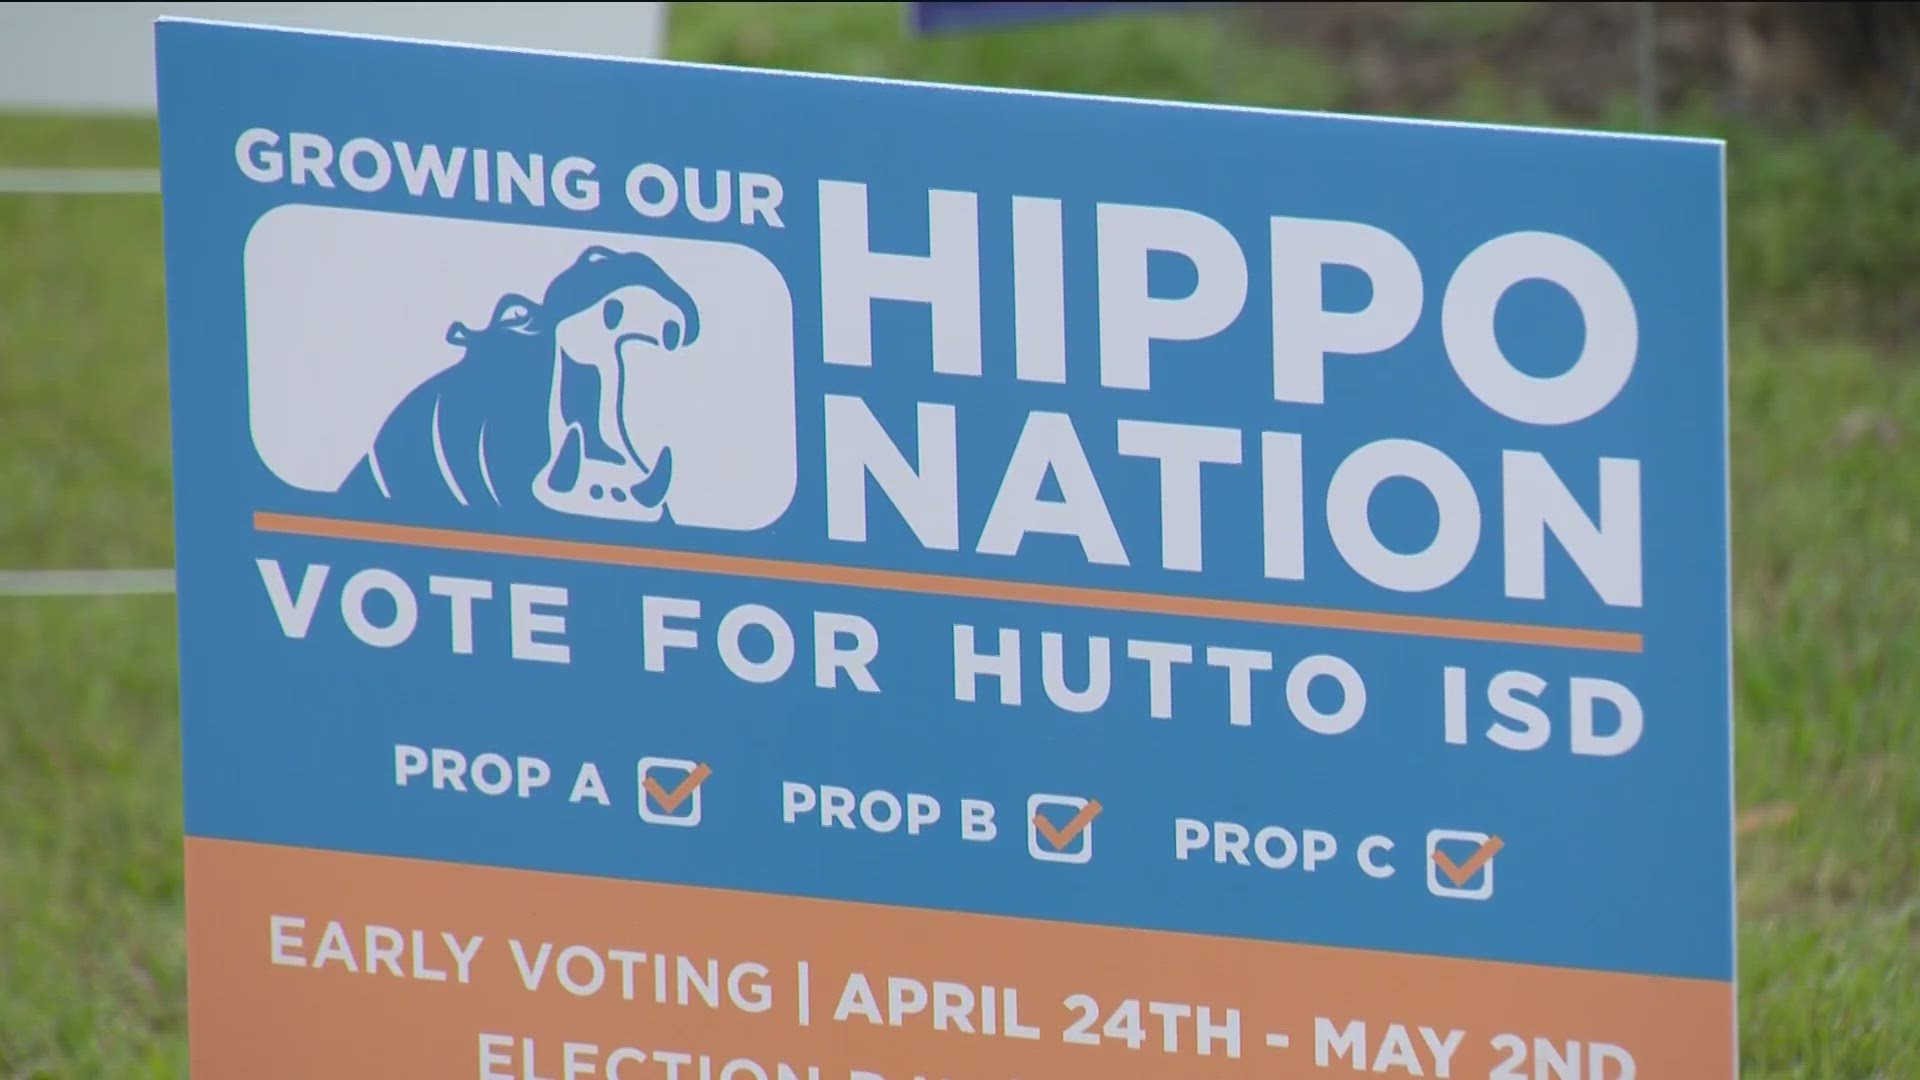 Voters in Hutto will be deciding on a $522 million school bond. KVUE's Matt Fernandez explains what that money would pay for in Hutto ISD.